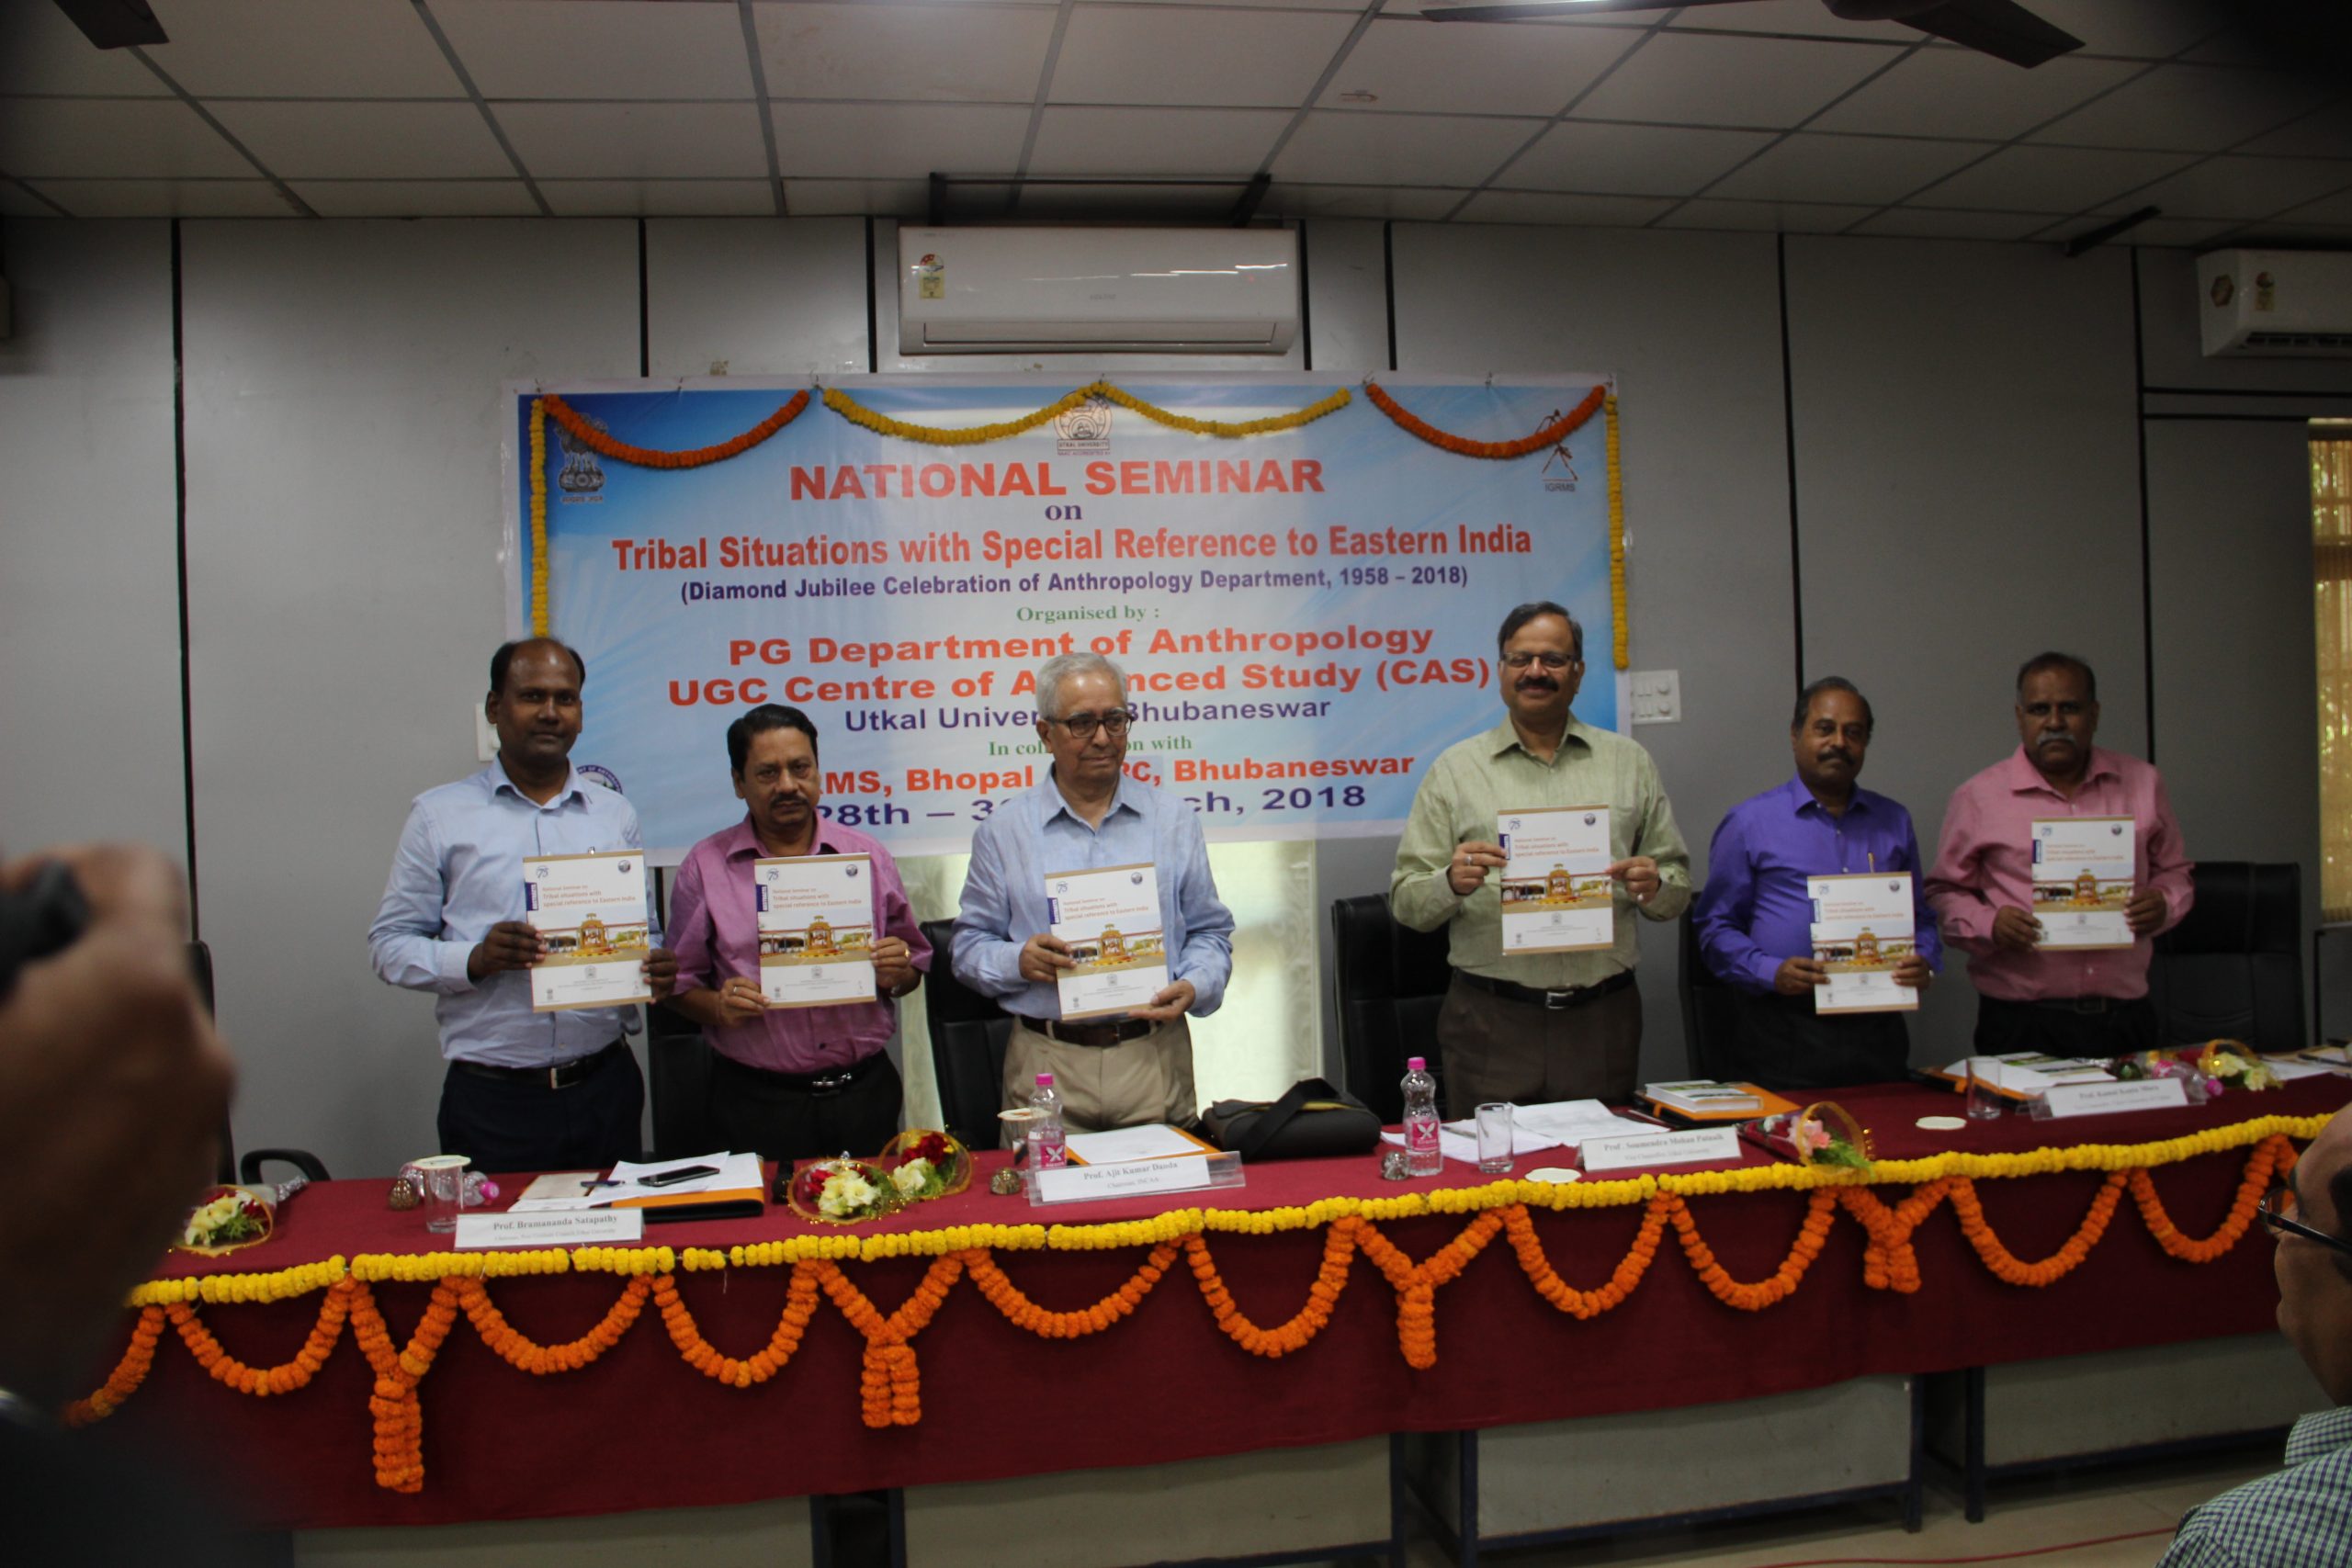 National Seminar On Tribal Situation With Special Reference to Eastern India 28th 30th March 2018